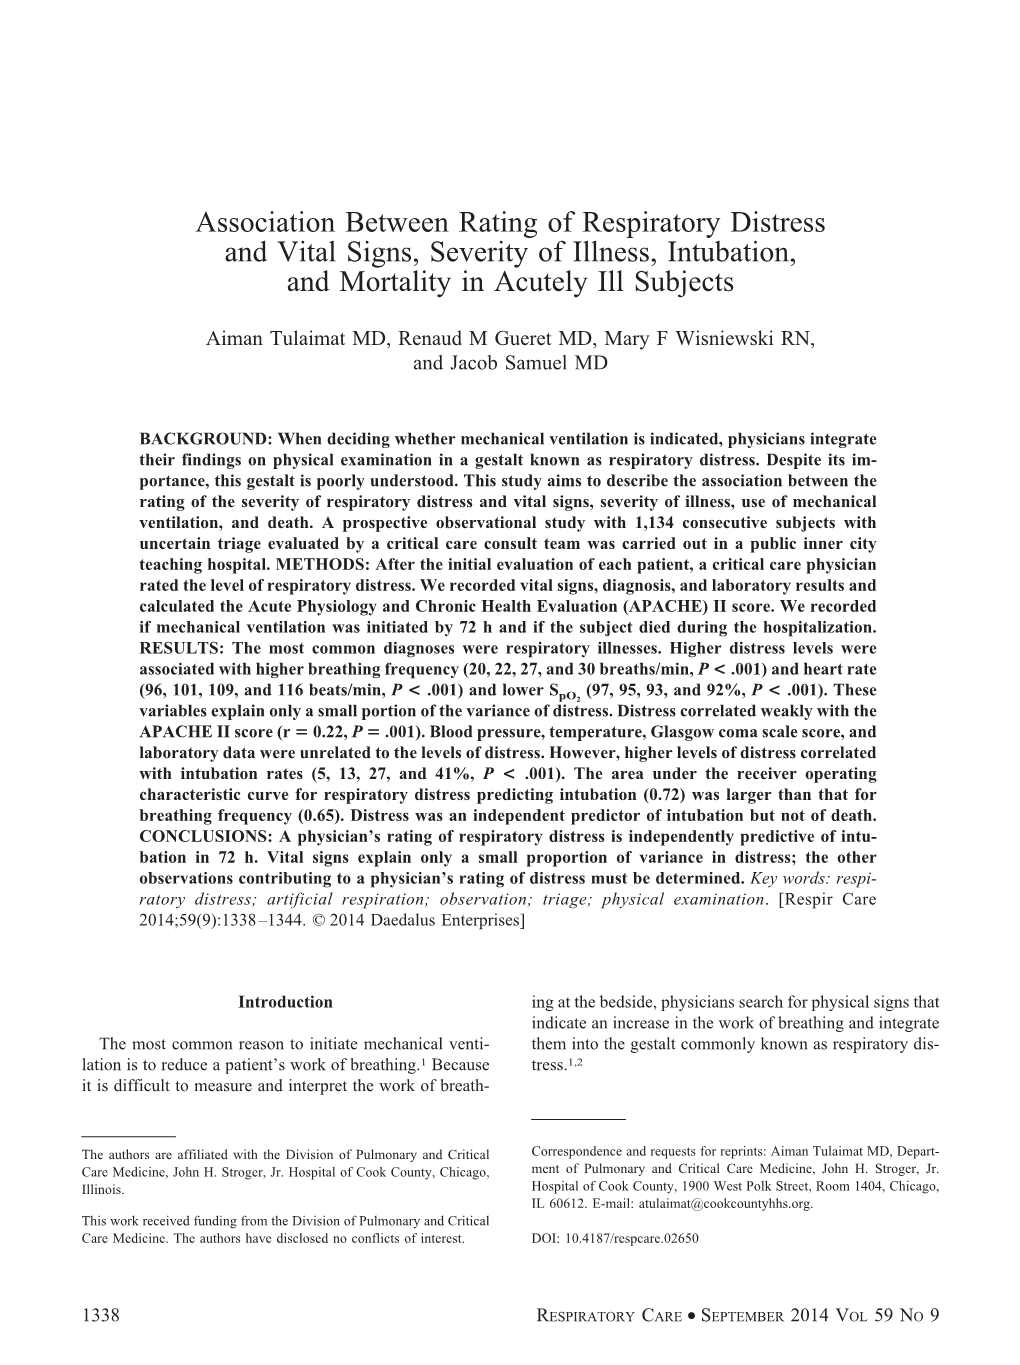 Association Between Rating of Respiratory Distress and Vital Signs, Severity of Illness, Intubation, and Mortality in Acutely Ill Subjects